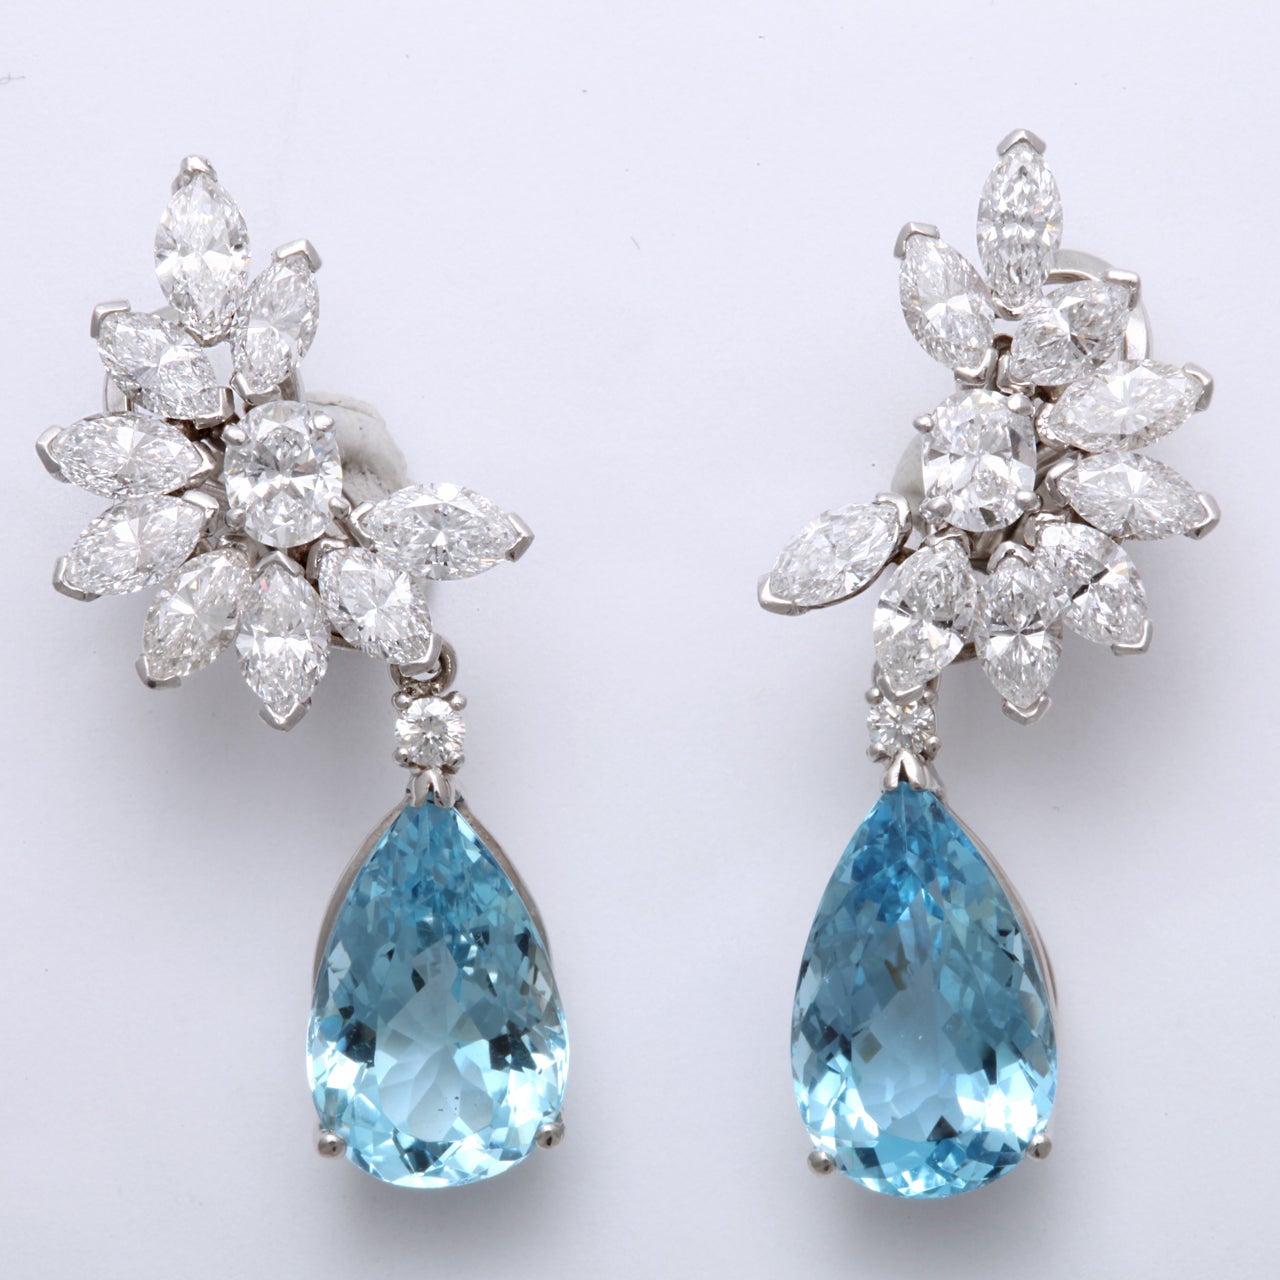 Platinum Diamond and Aquamarine Floral Day Night Earrings. These day and night earrings featured beautiful Aquamarines and Diamonds. Approximately 7ct of Diamonds and approximately 25ct of Aquamarine. Length - 1 9/16